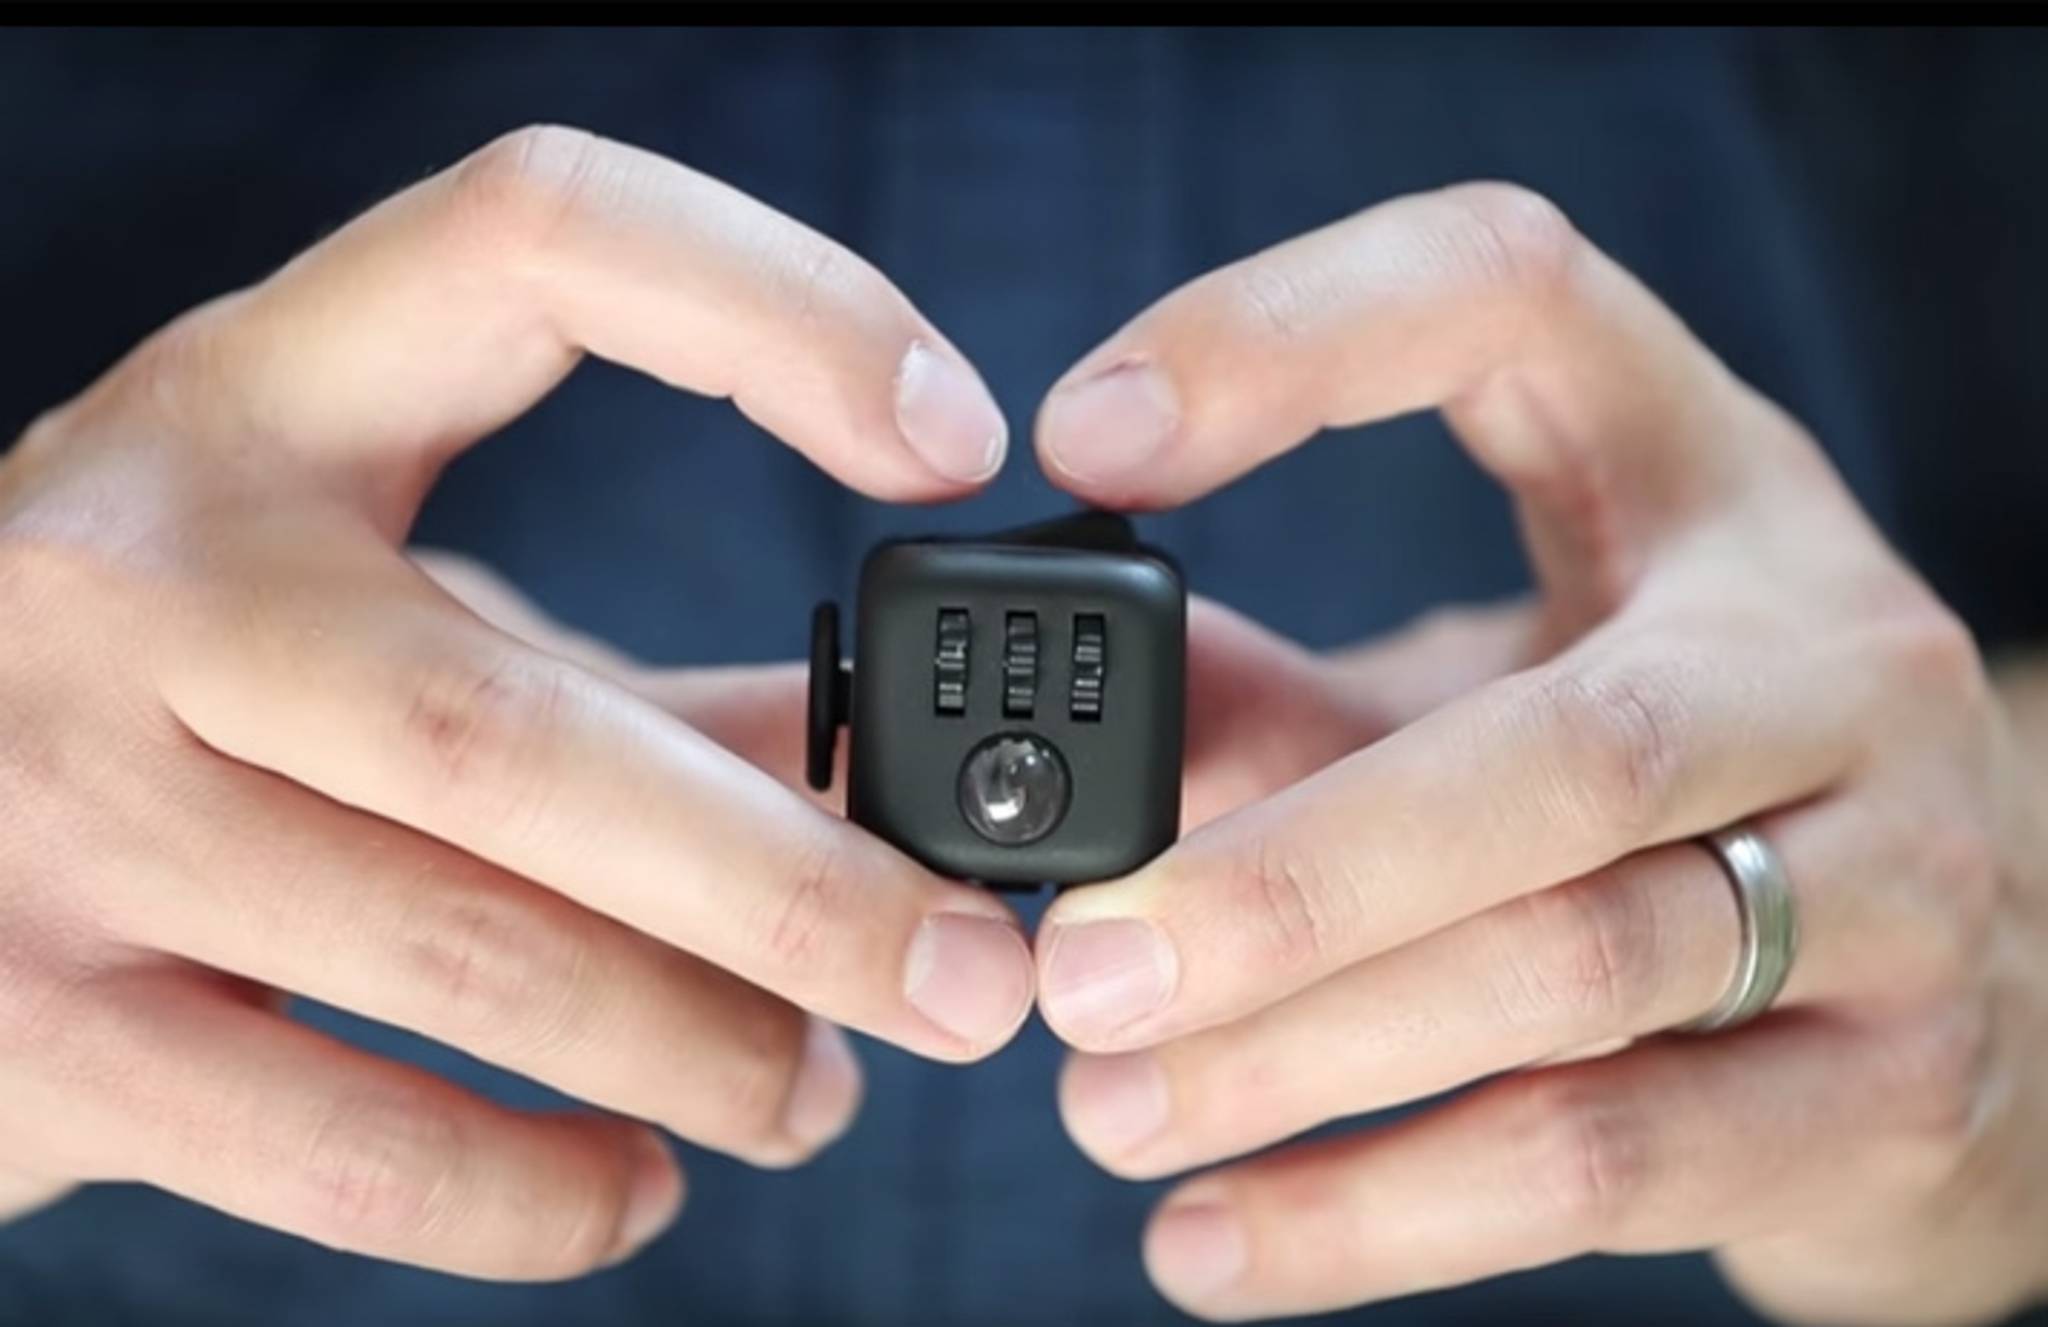 The Fidget Cube is a desk toy for people who can't sit still